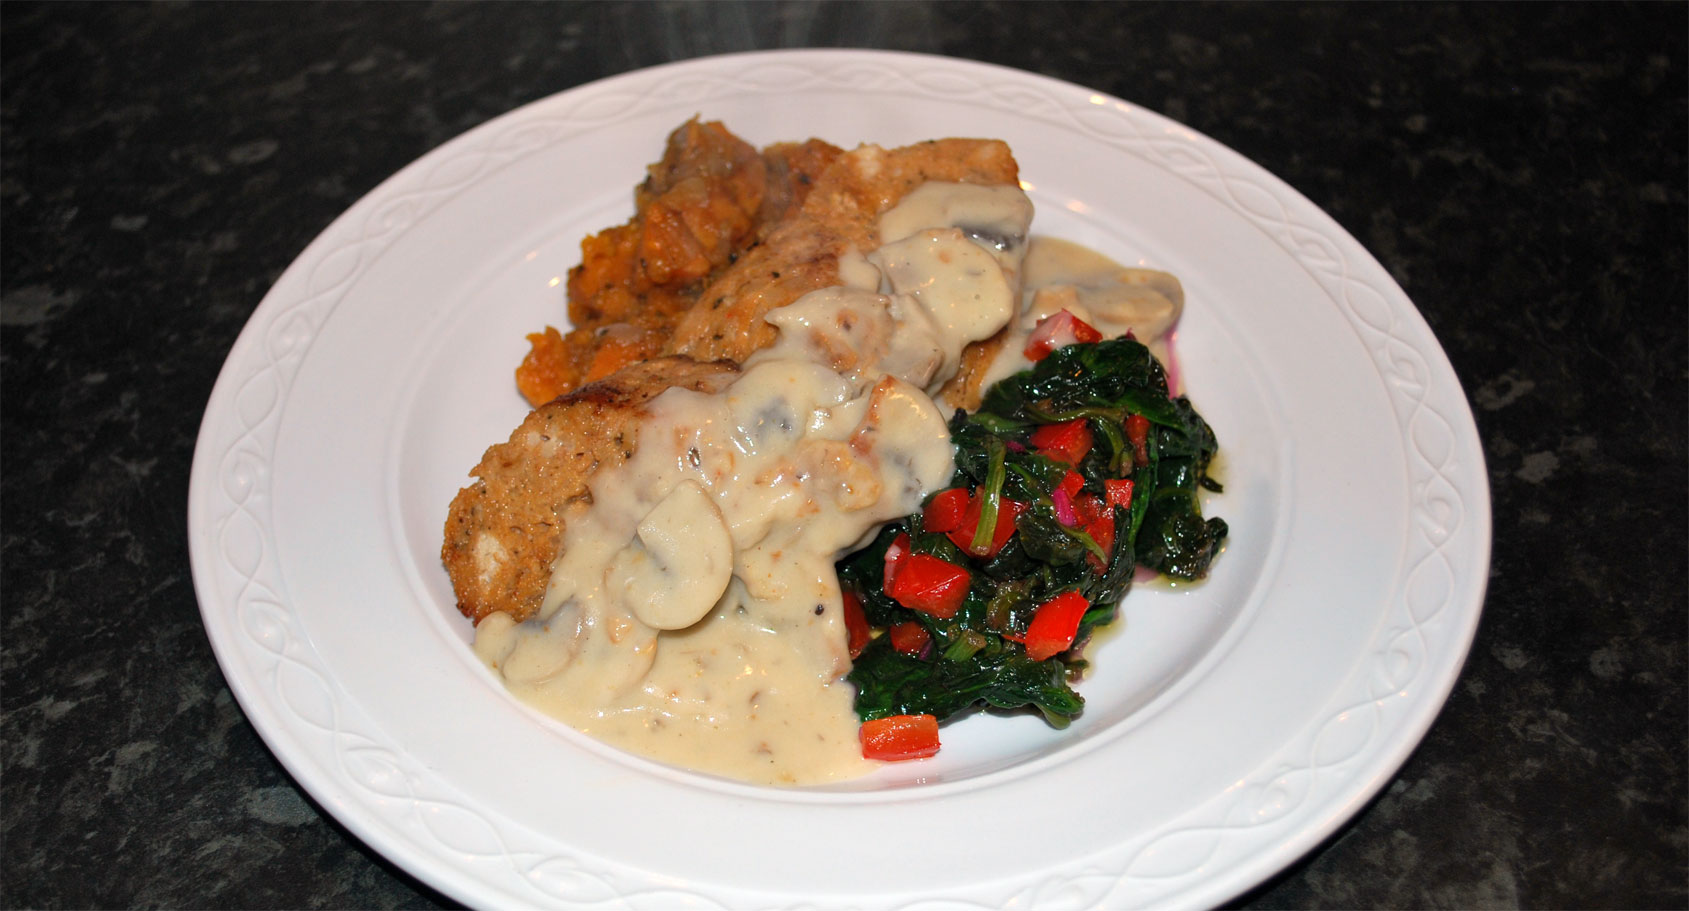 Escalope of Chicken with Sweet Potato, Mushroom & Grain Mustard Sauce with Spinach & Pimento